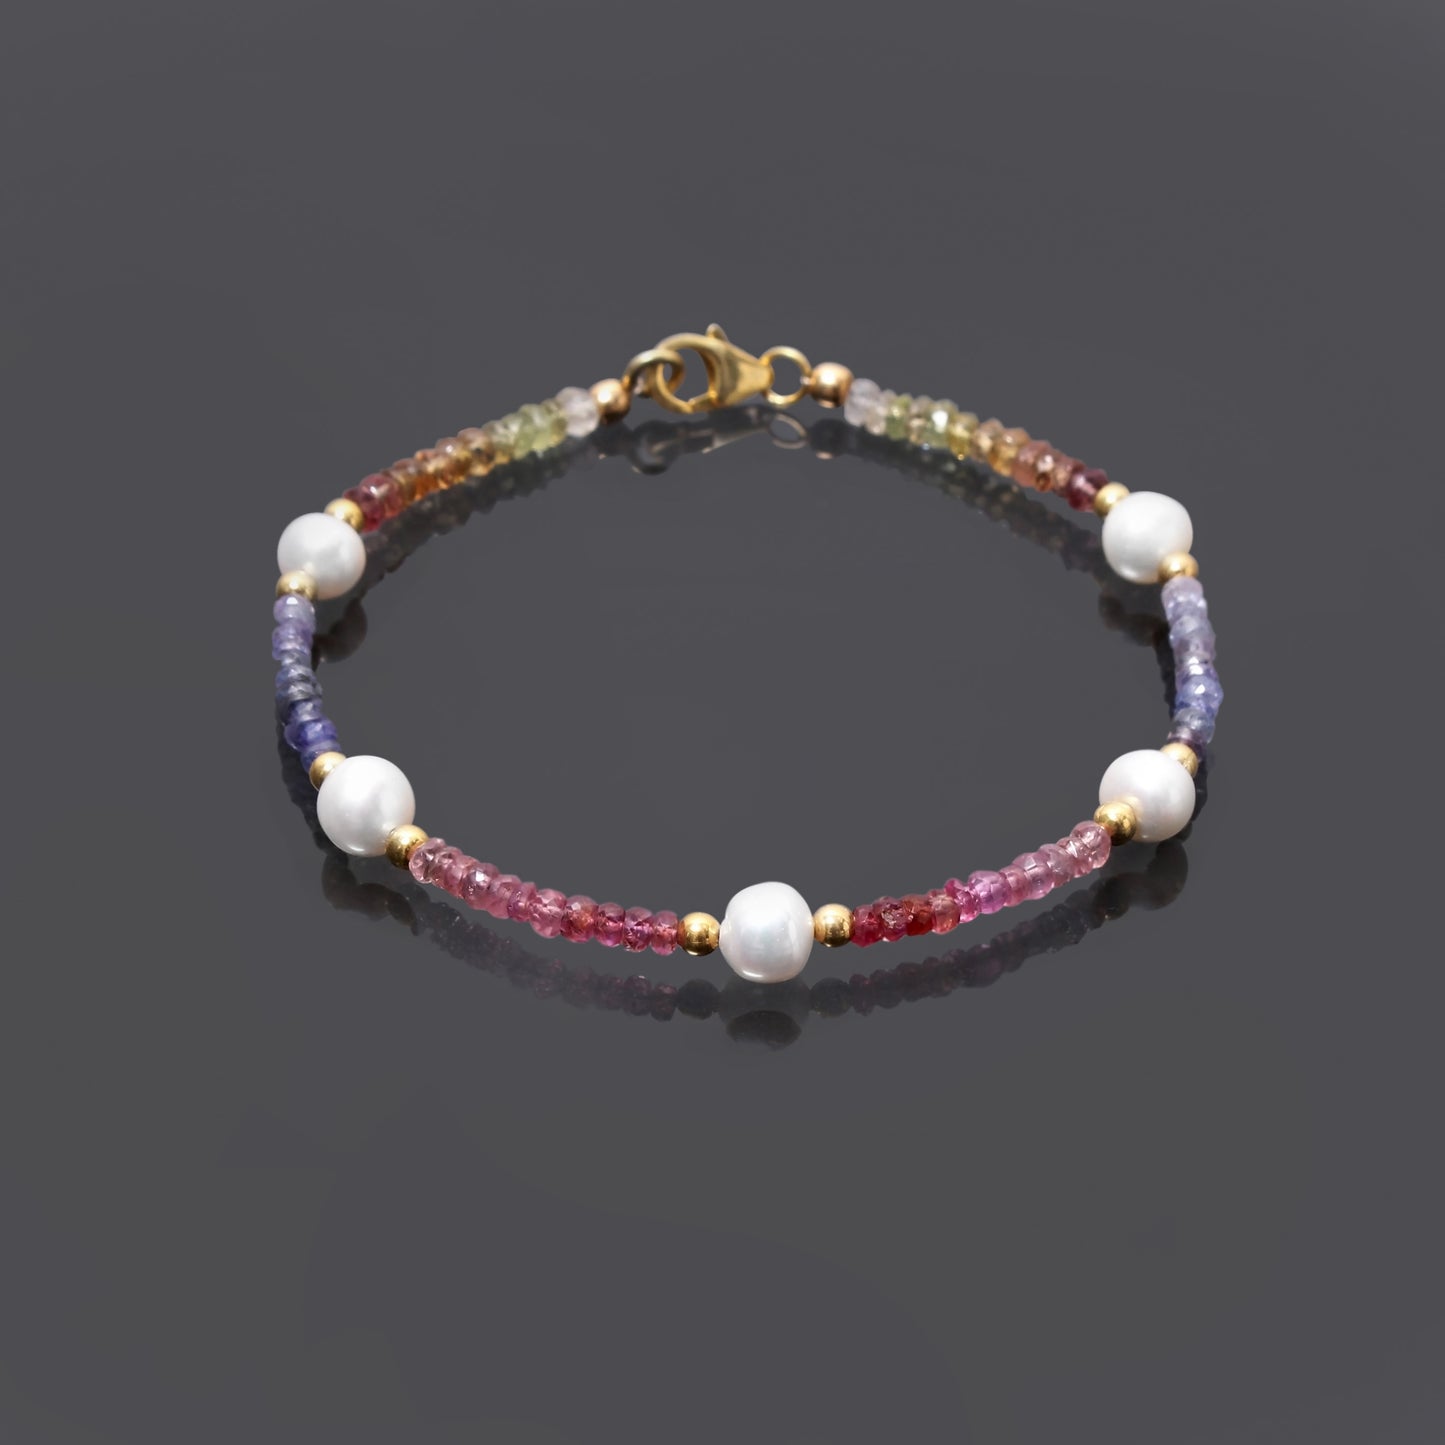 Multi-Sapphire and Pearl Bracelet in 925 Sterling Silver | Handcrafted with Love